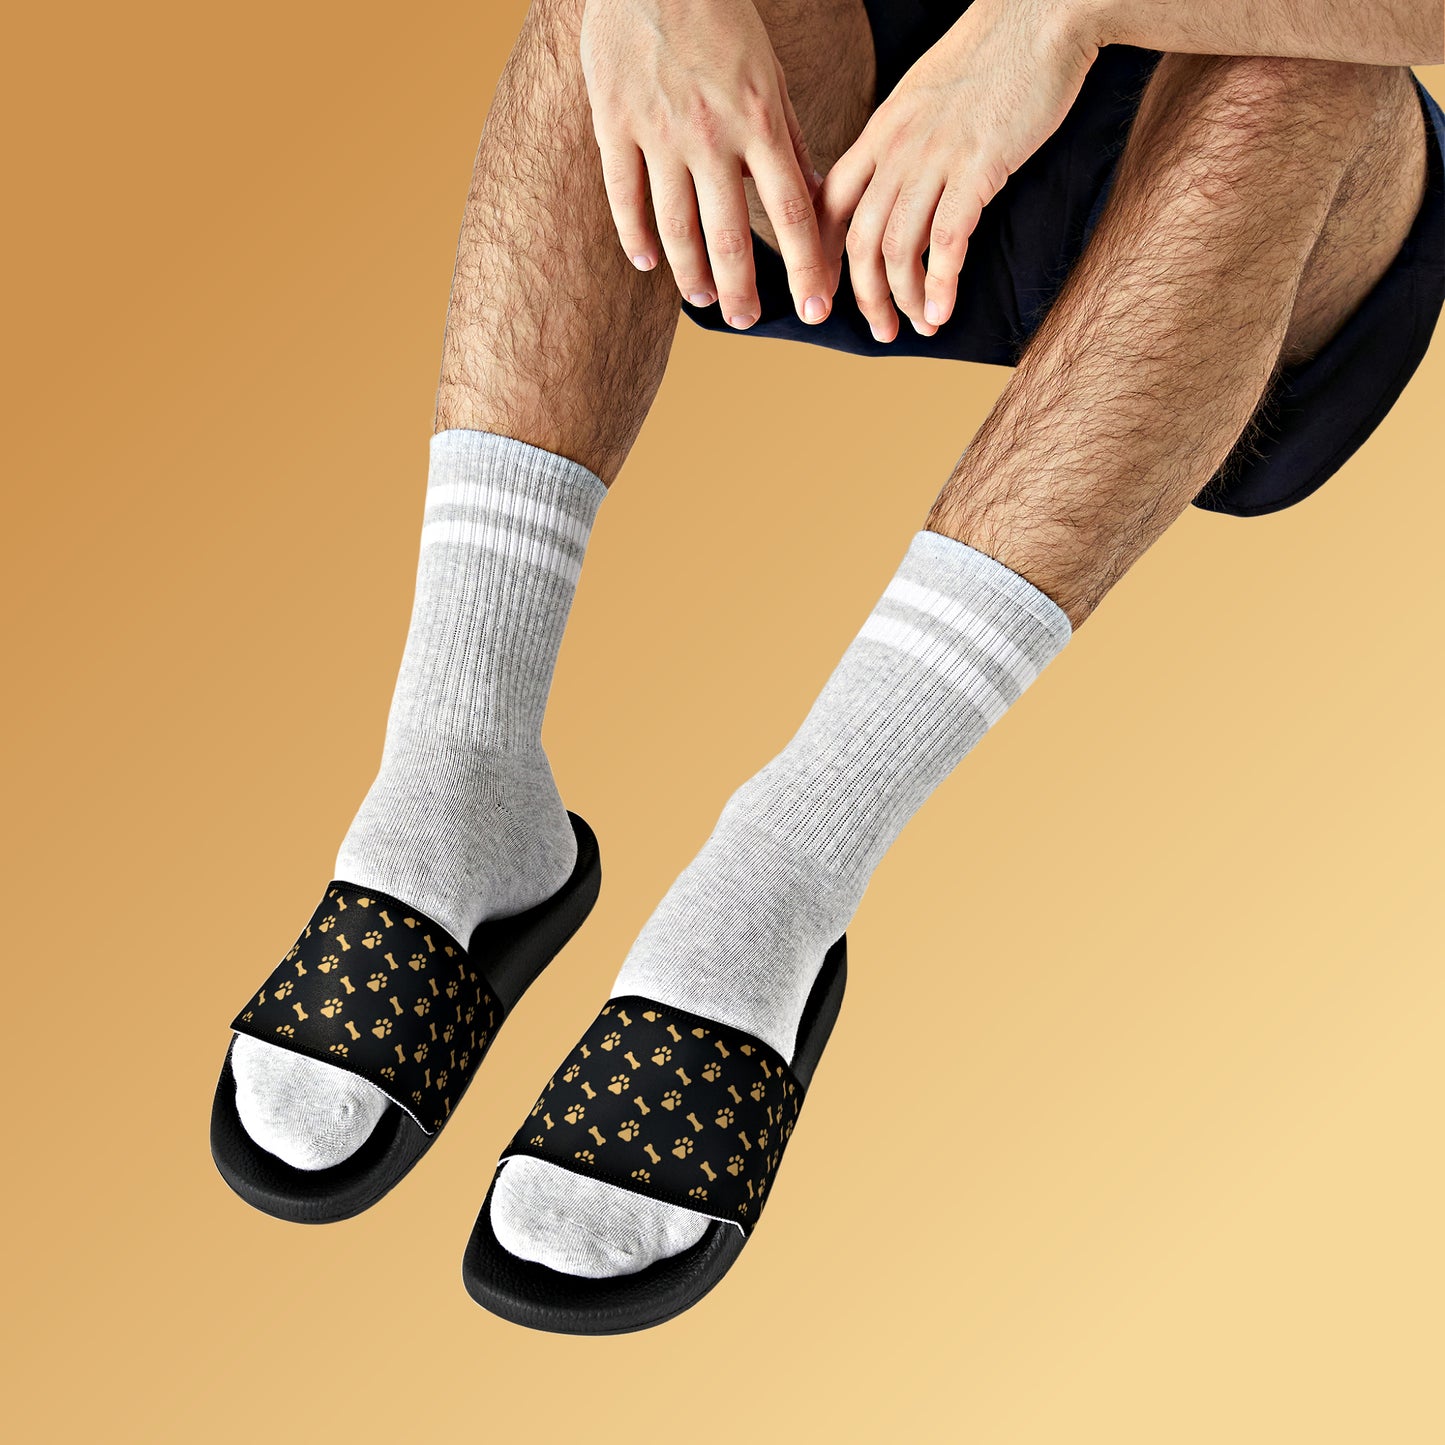 Mock up of a man wearing white socks and a pair of these sandals